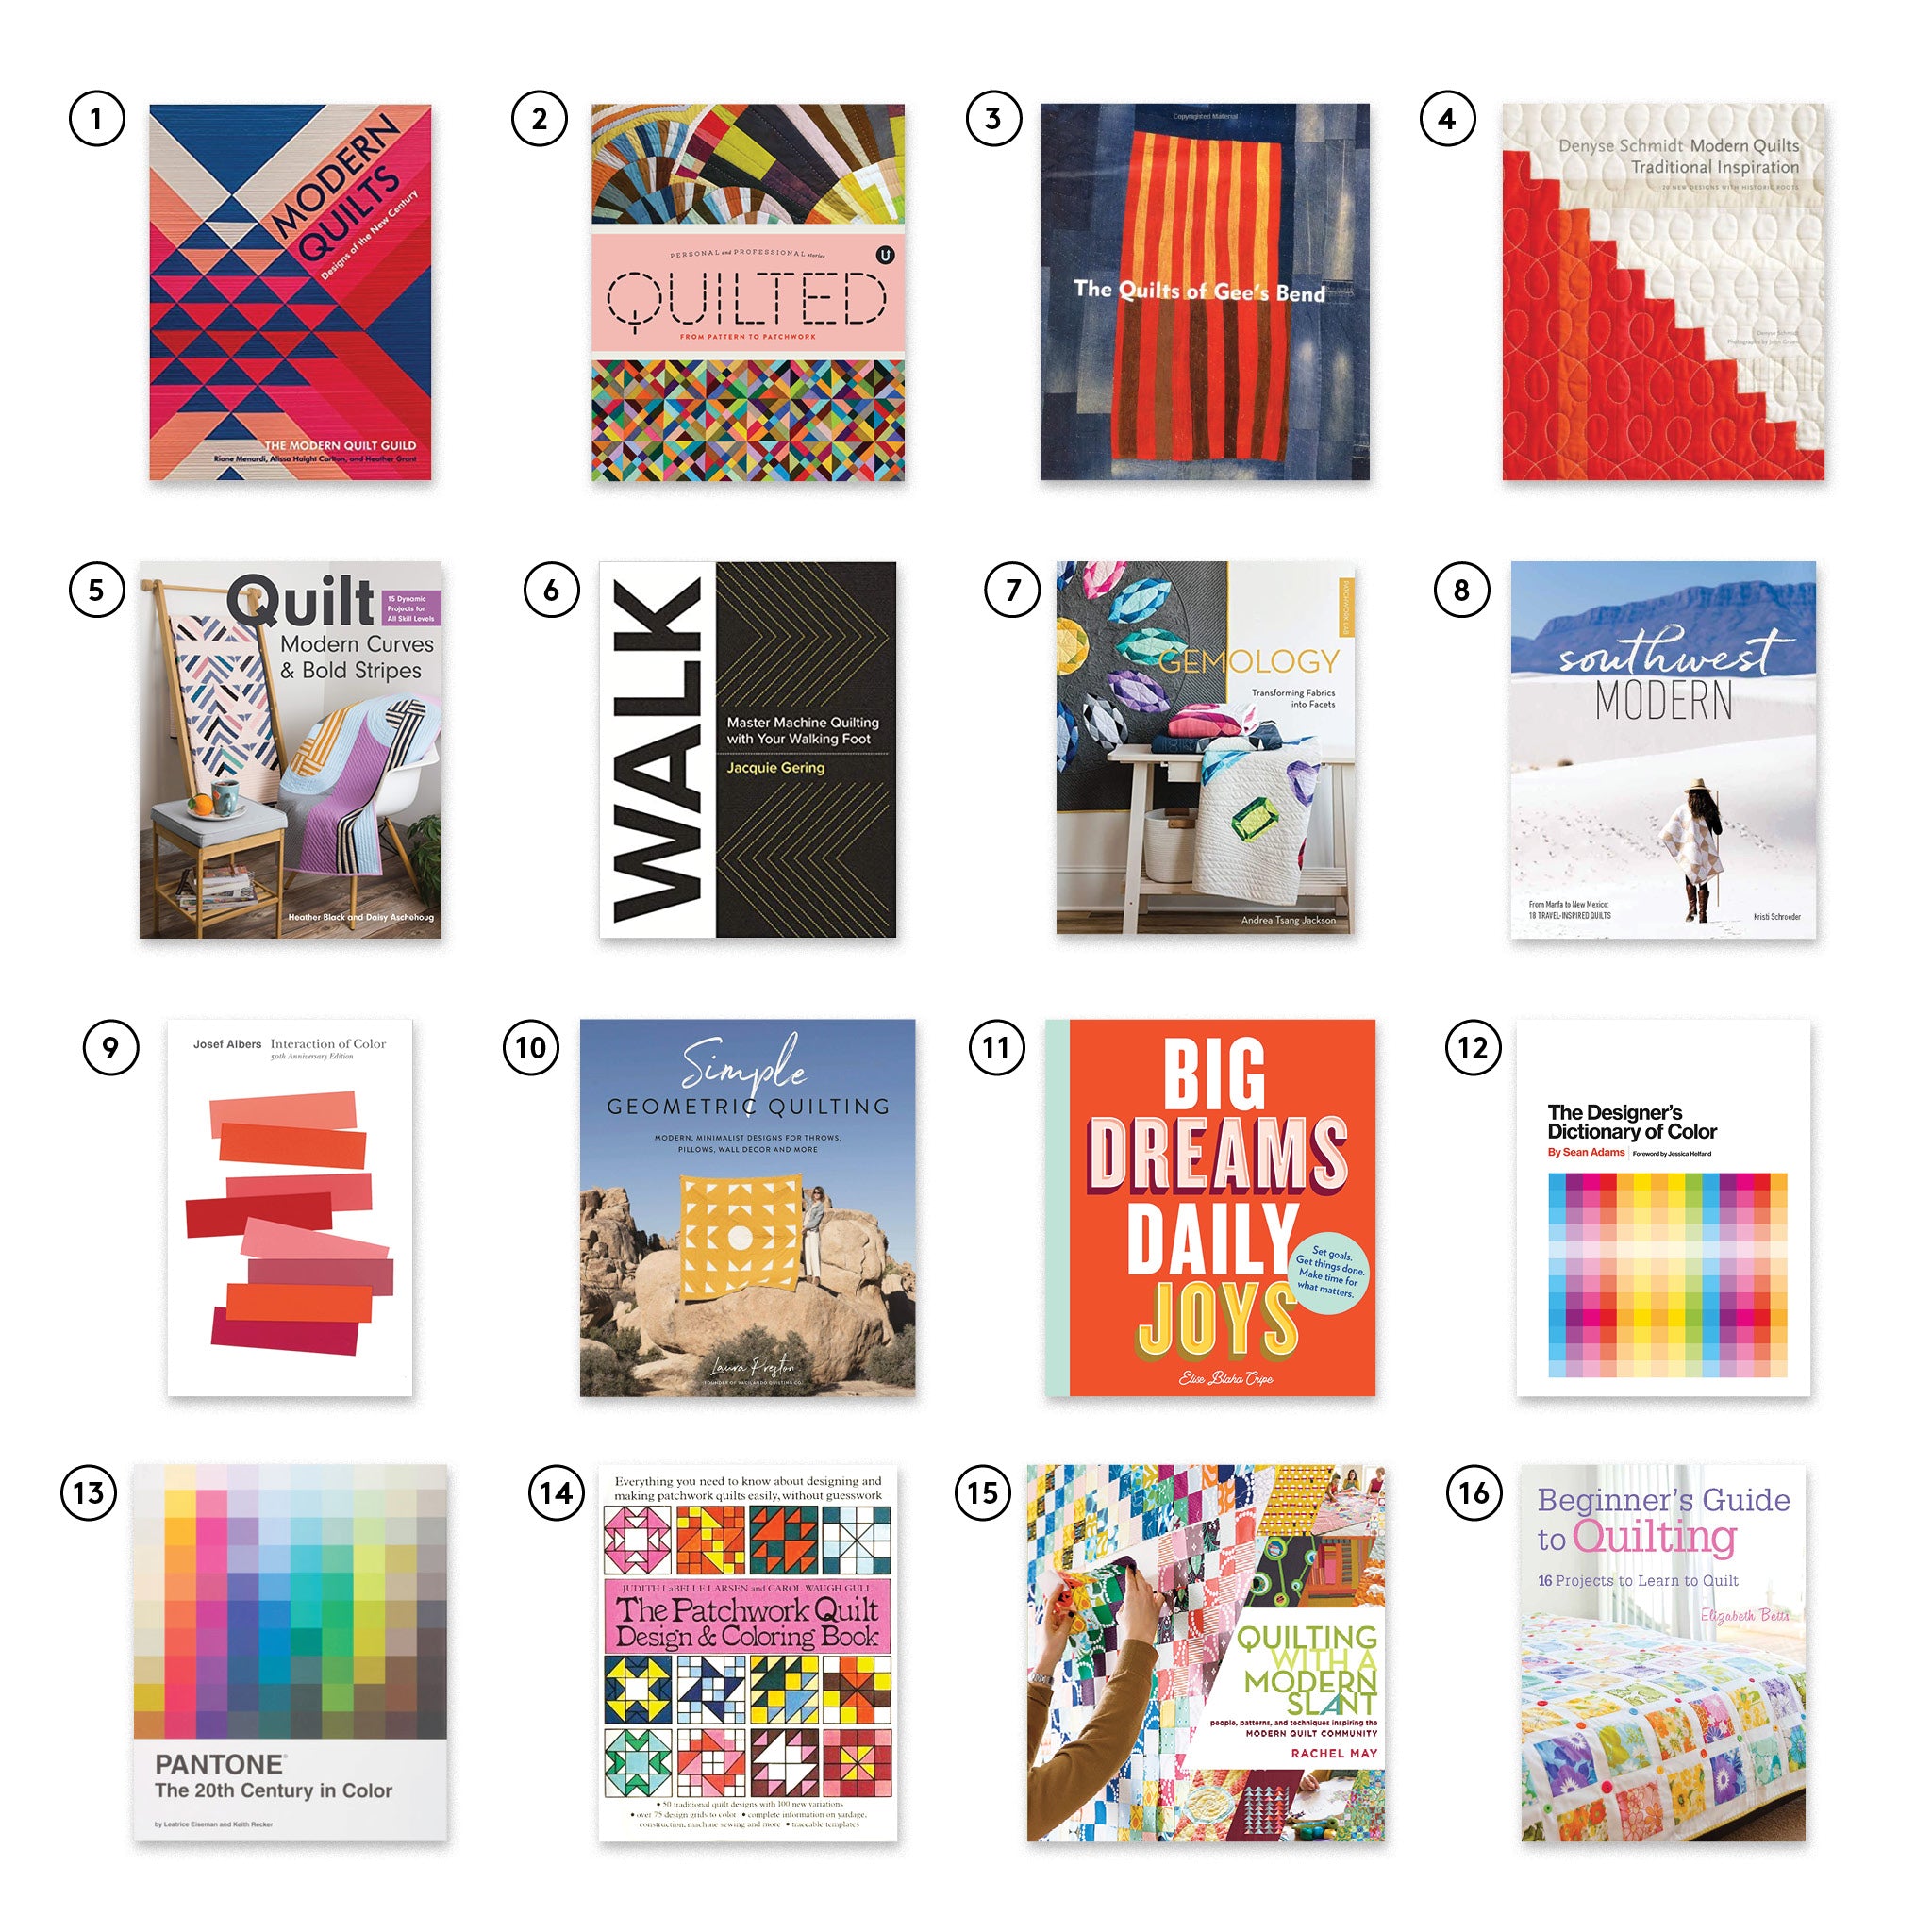 My Must-Have Quilting Books – The Blanket Statement